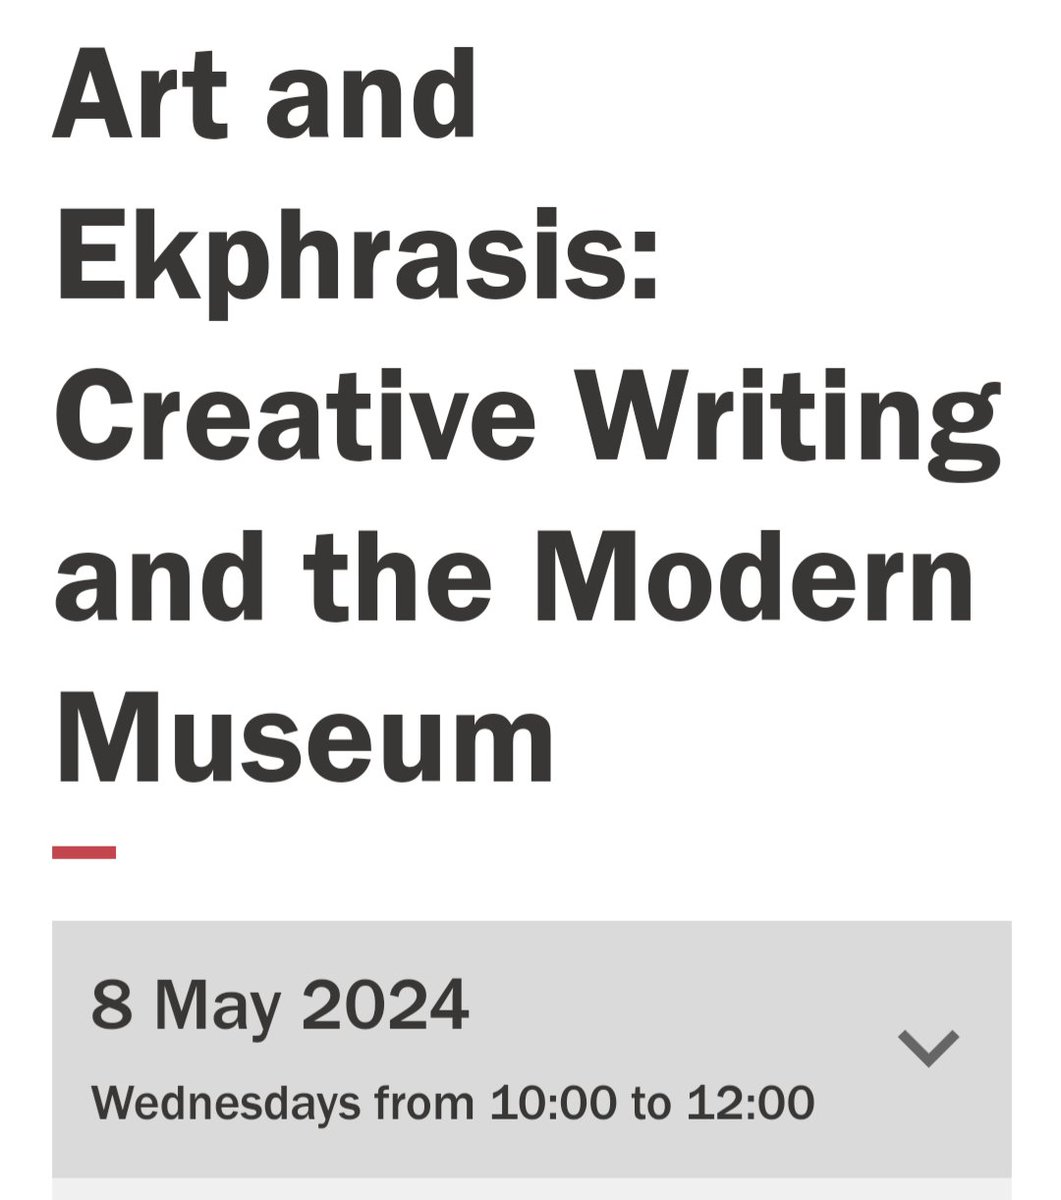 Really excited to be running this #ekphrastic #creativewriting course for @cardiffuni lifelong learning center, starting in May! cardiff.ac.uk/part-time-cour…